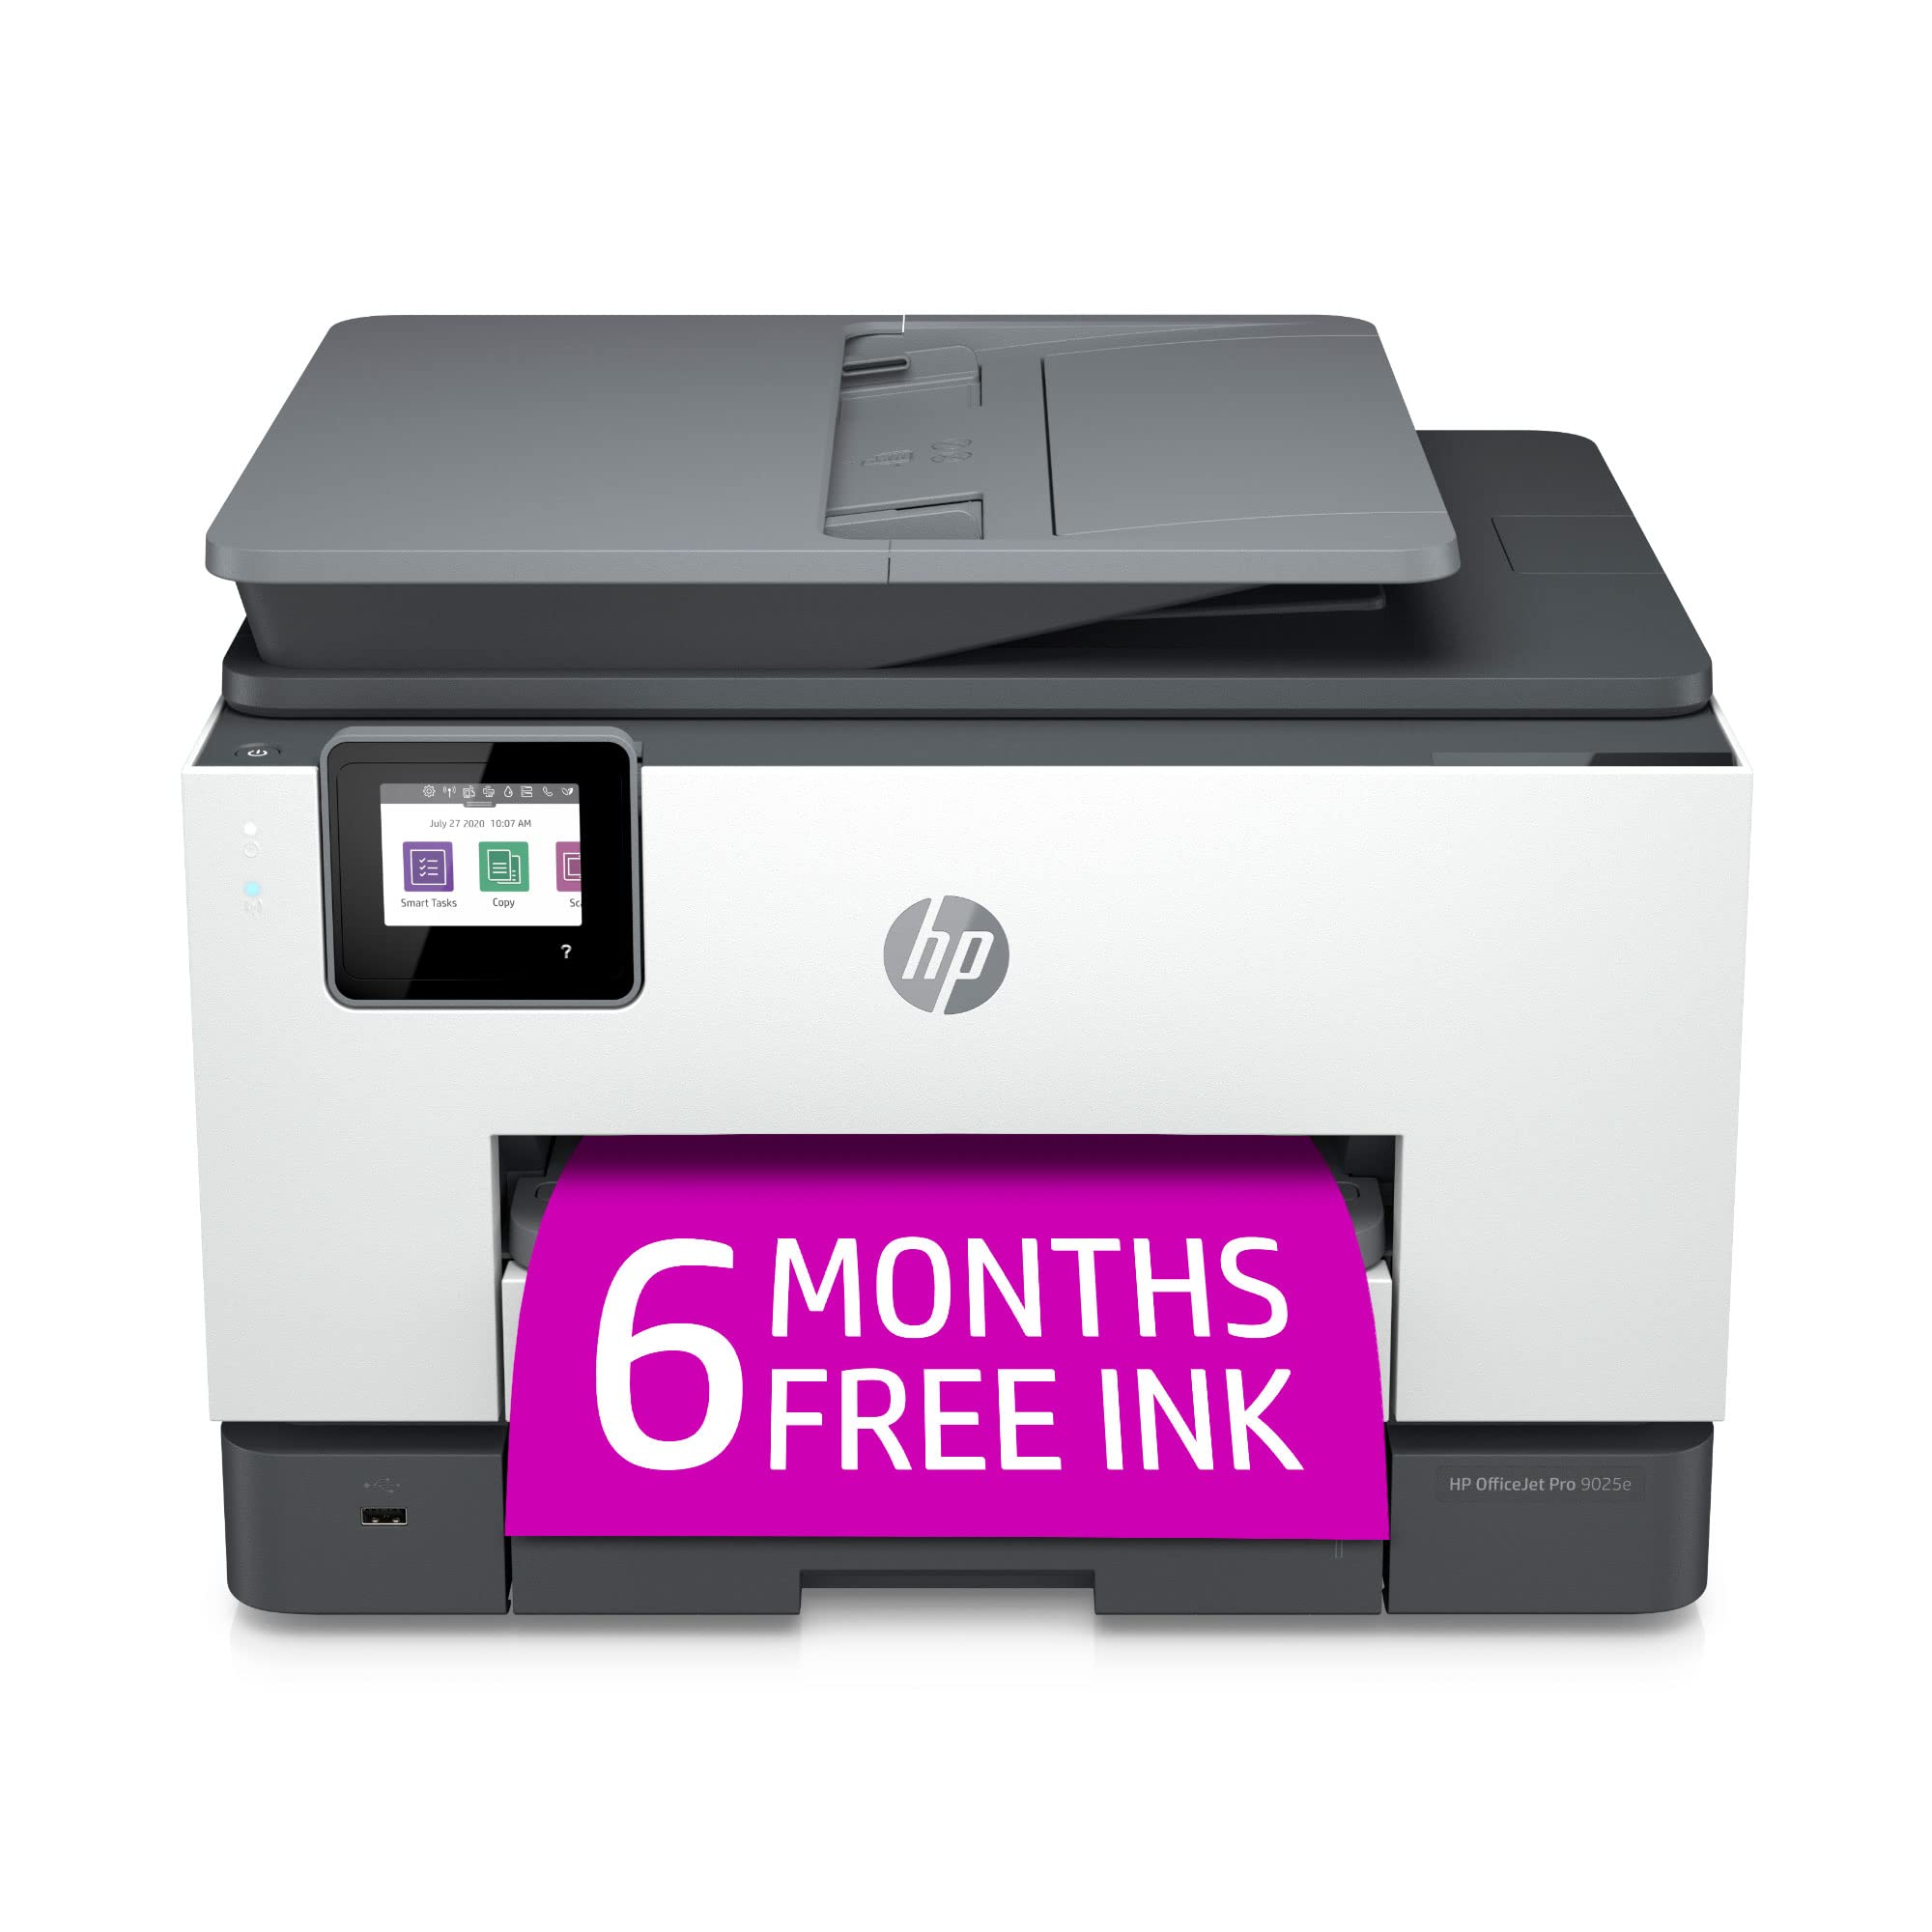 HP OfficeJet Pro 9025e Wireless Color All-in-One Printer with Bonus 6 Months Instant Ink with +